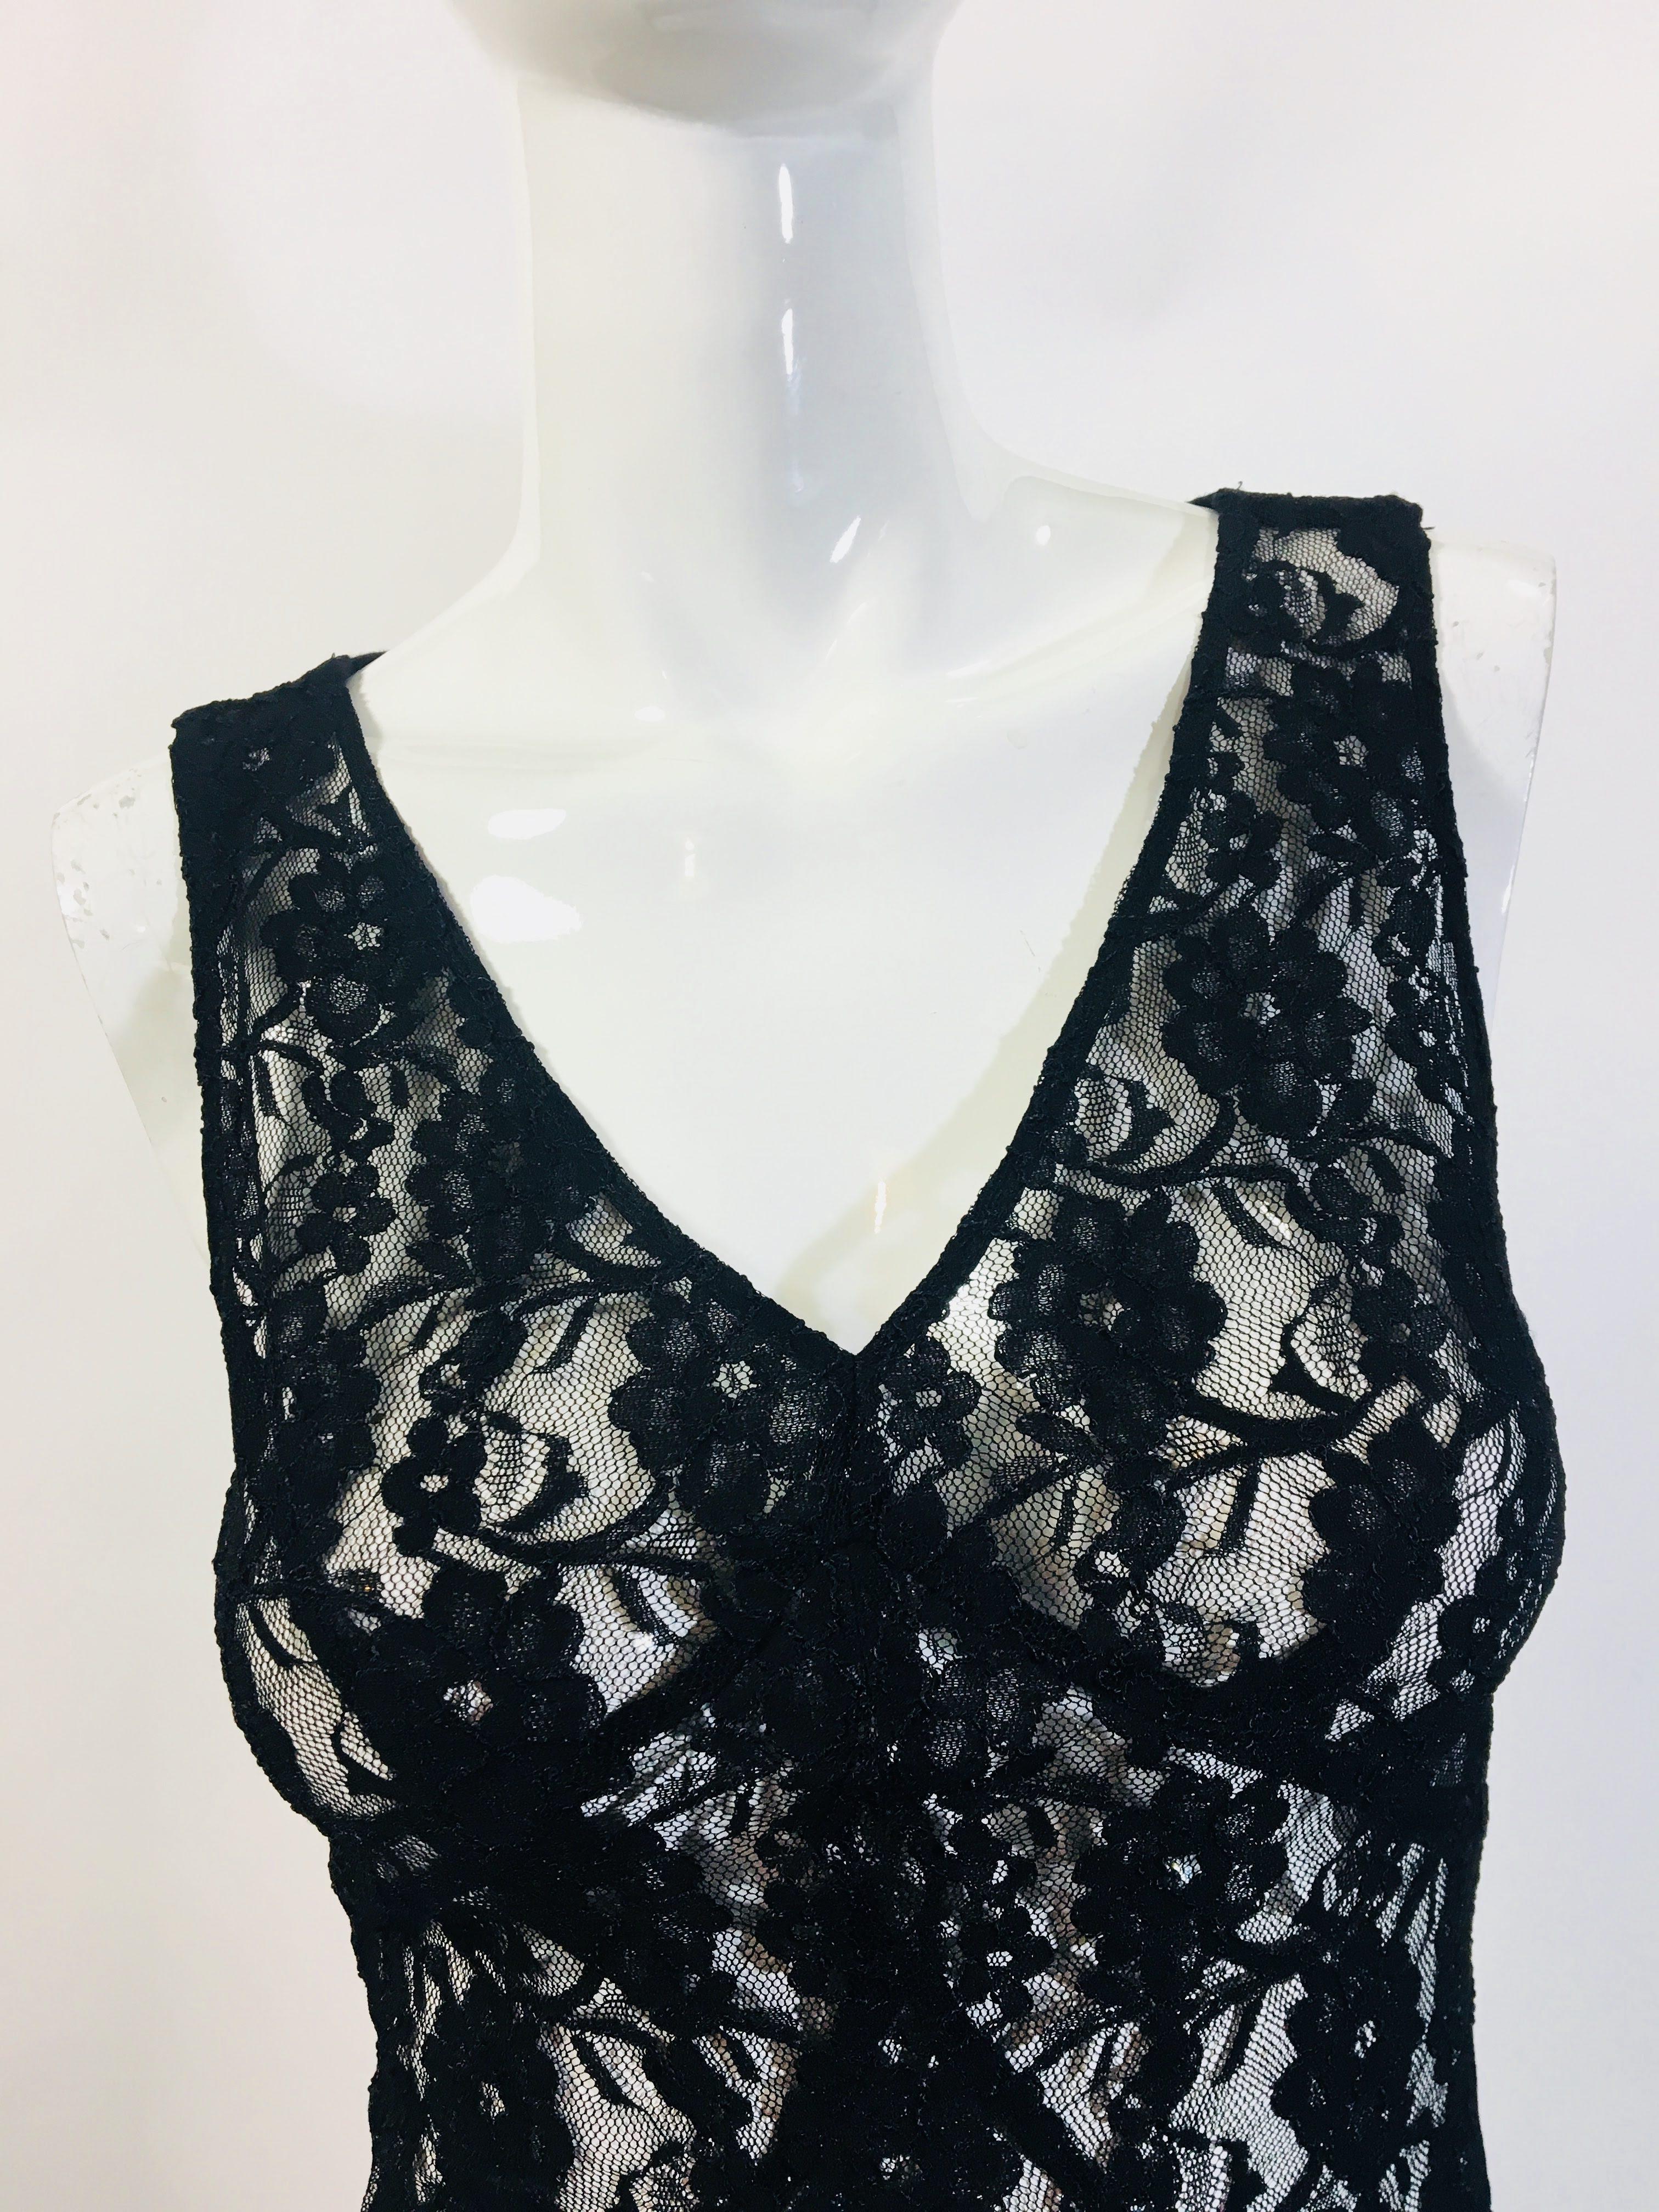 D&G by Dolce & Gabbana 
Black Sleeveless Lace Top 
V-Neck
Sheer
Front- Floral Lace
Back- Perforated Lace